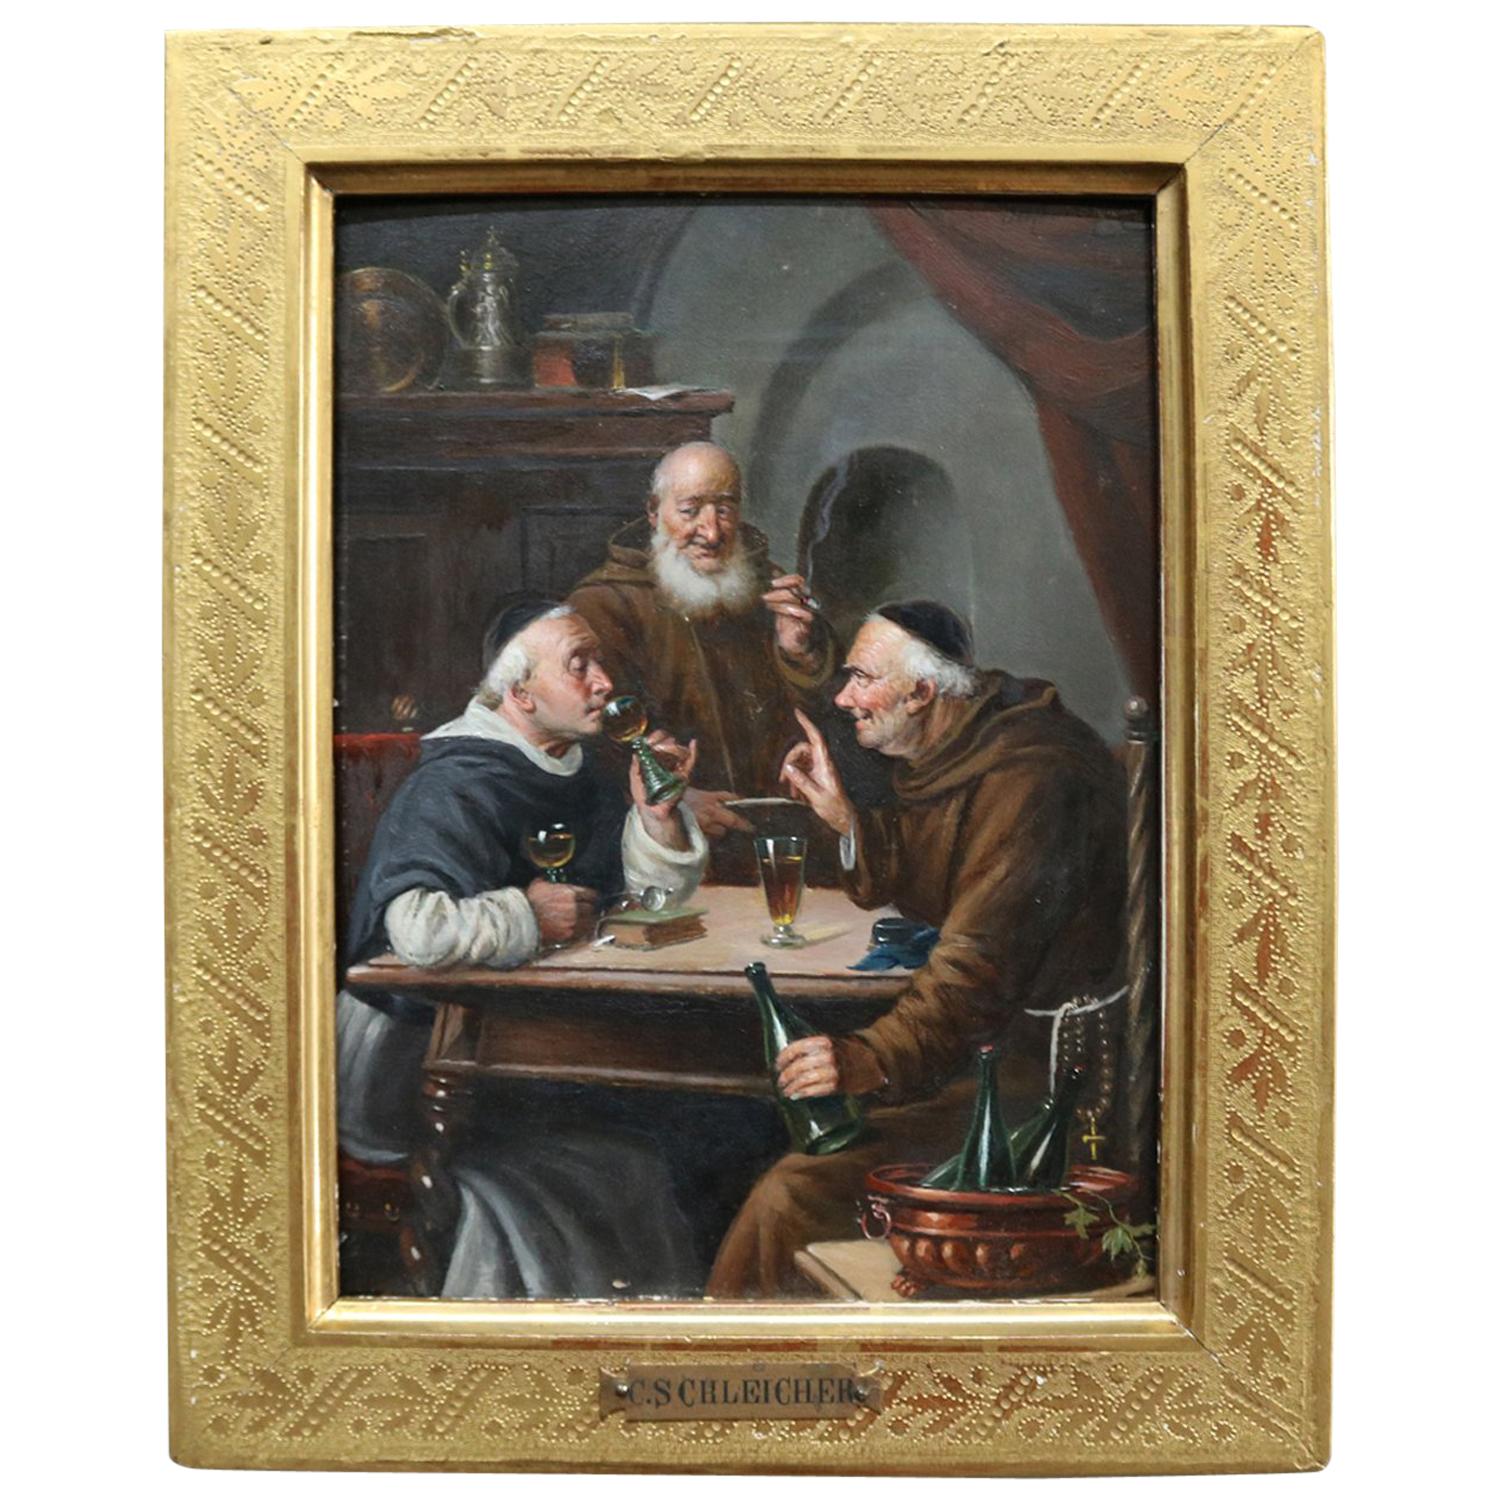 Austrian Oil on Board Genre Painting of Monks Signed C Schleicher, circa 1850